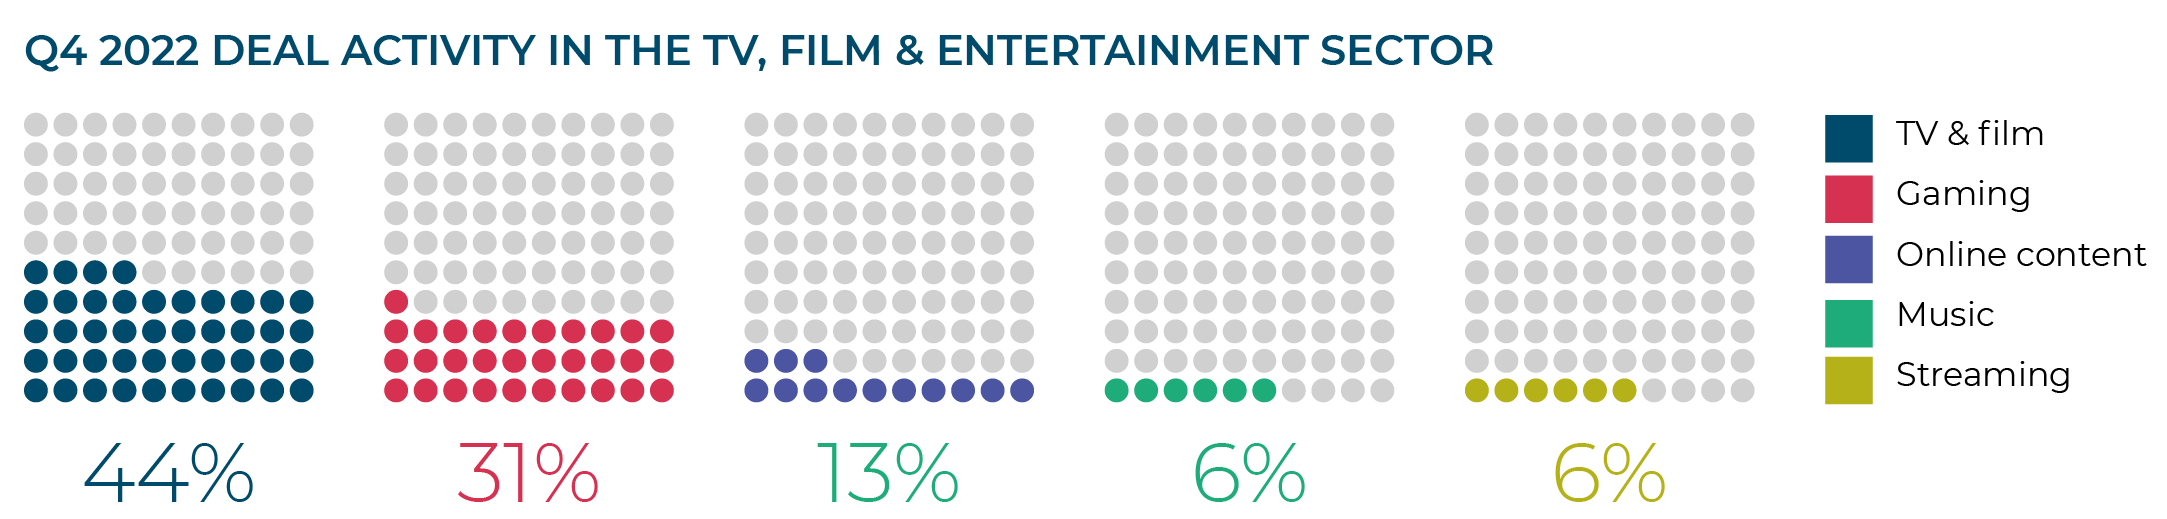 Q4 2022 DEAL ACTIVITY IN THE TV, FILM & ENTERTAINMENT SECTOR